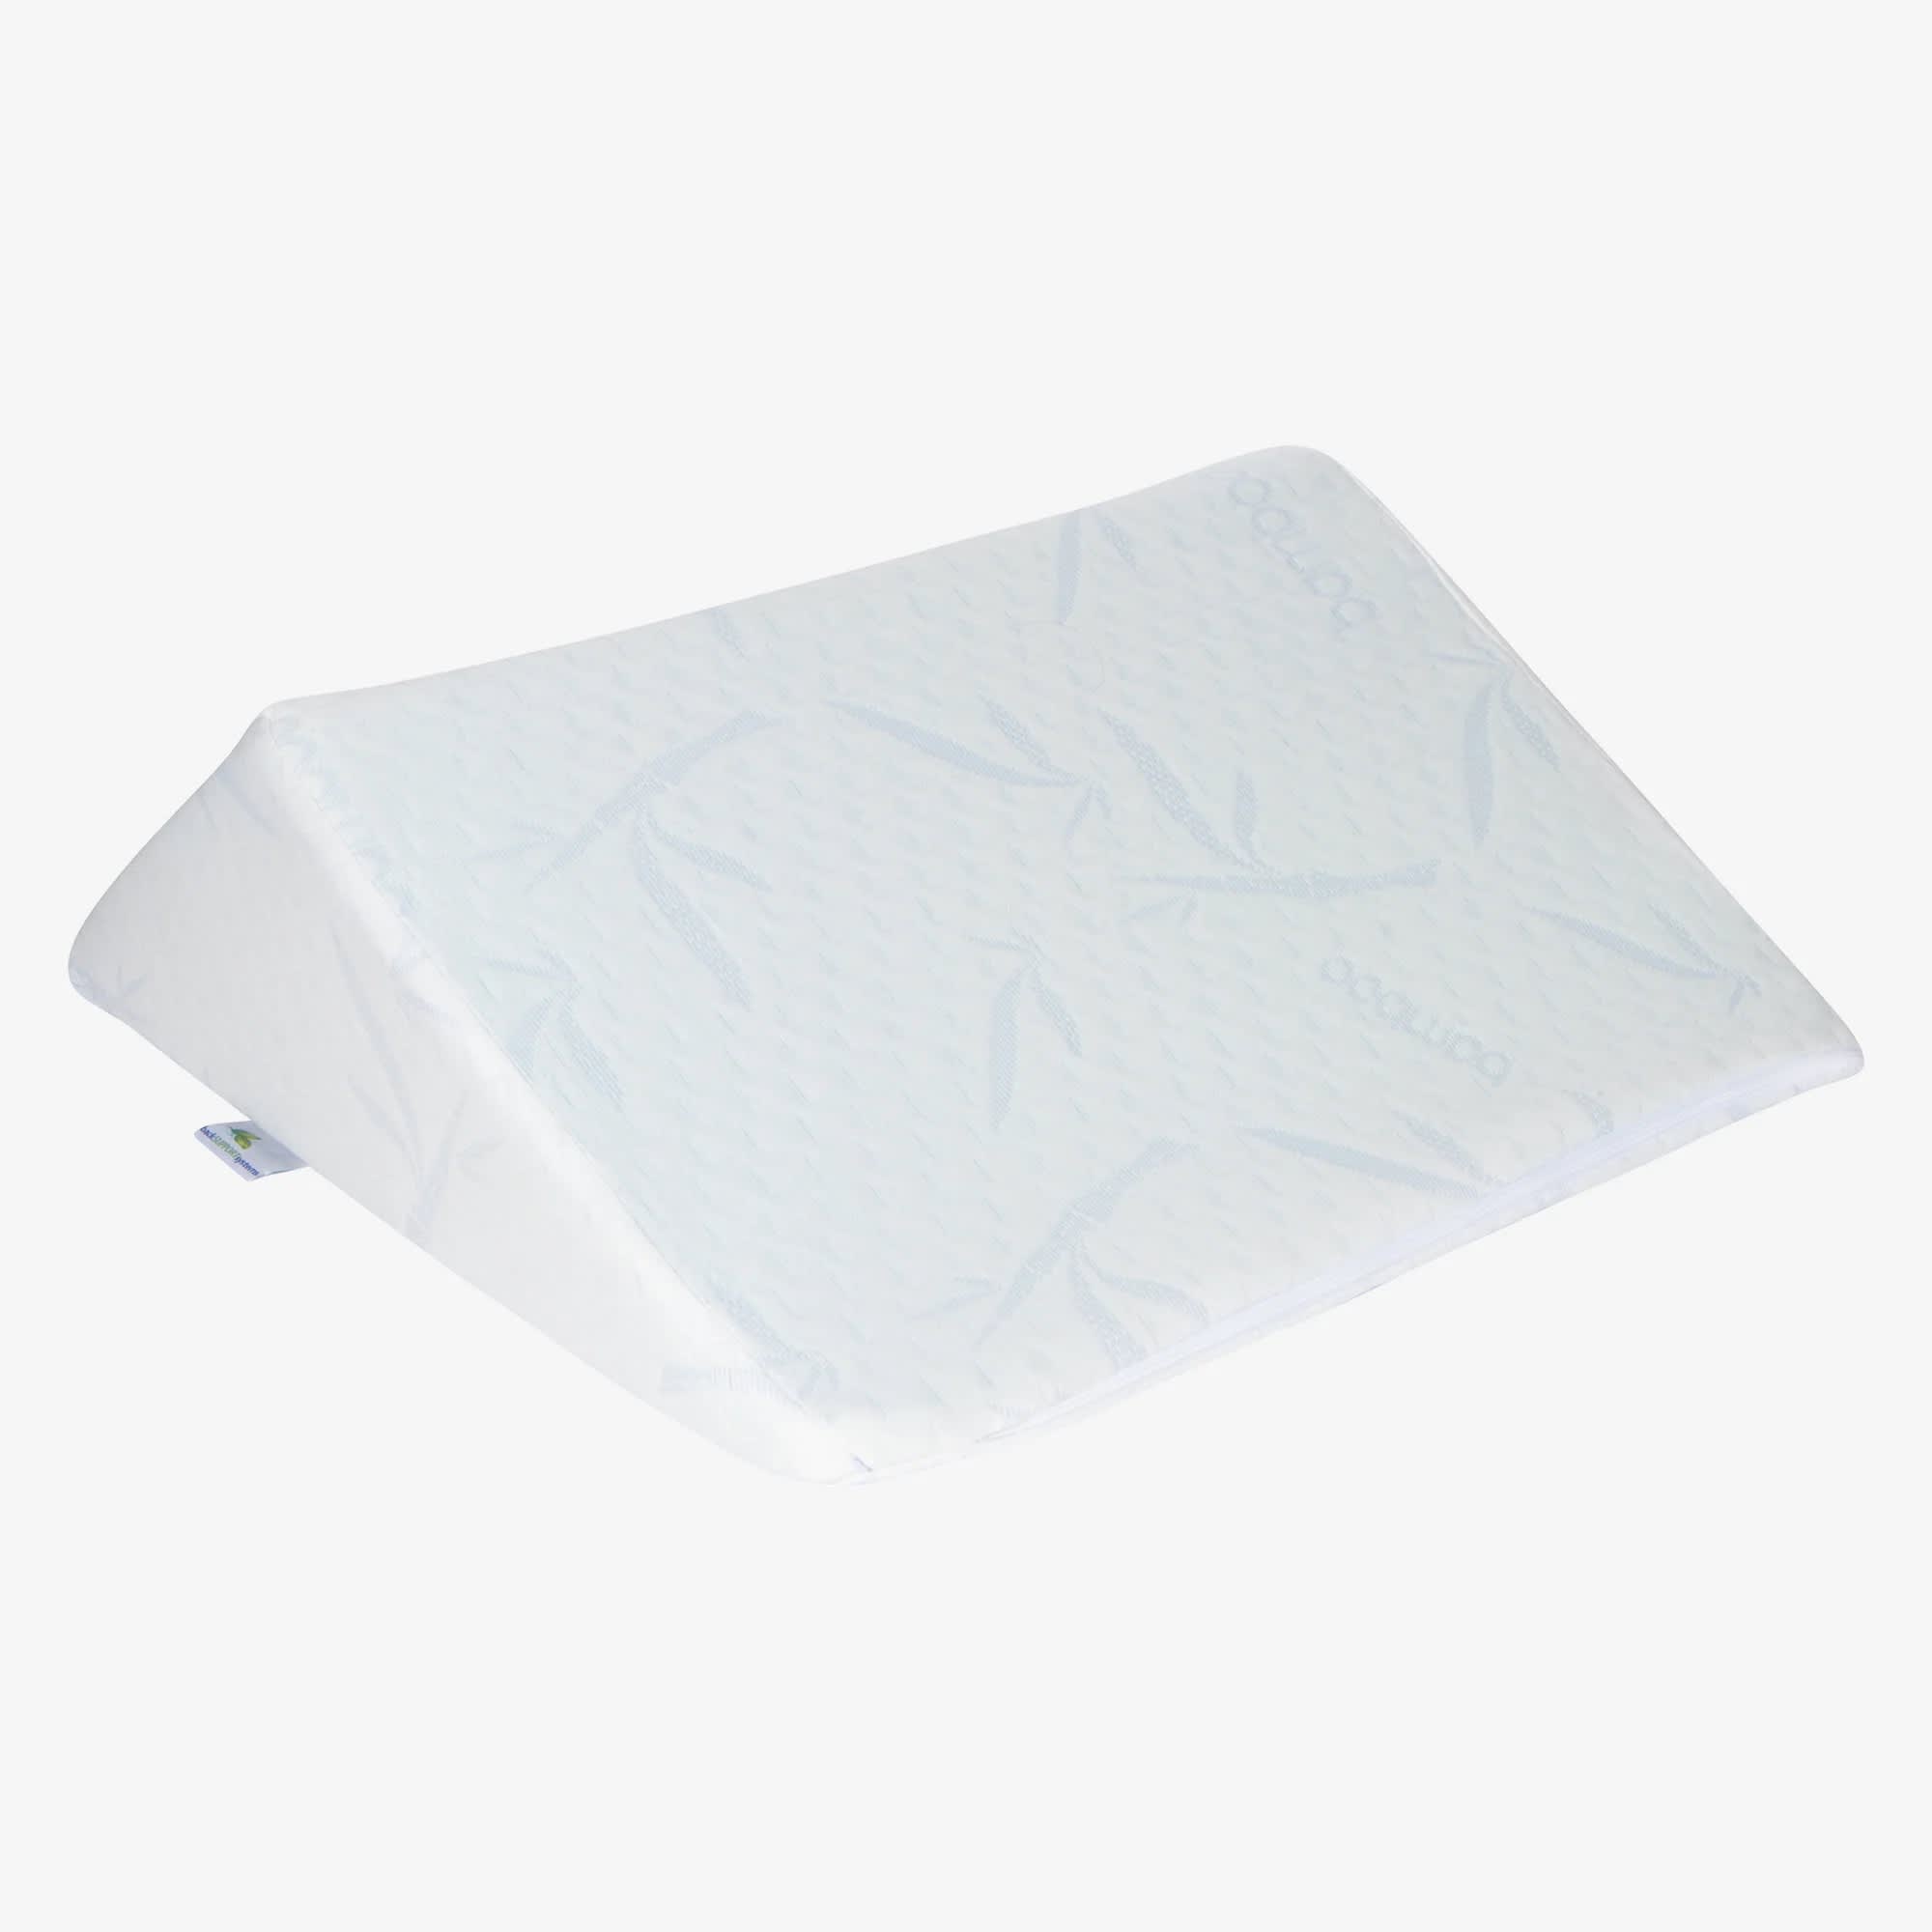 Sleepnitez Wedge Pillow and Back and Side Sleeper Pillow for The